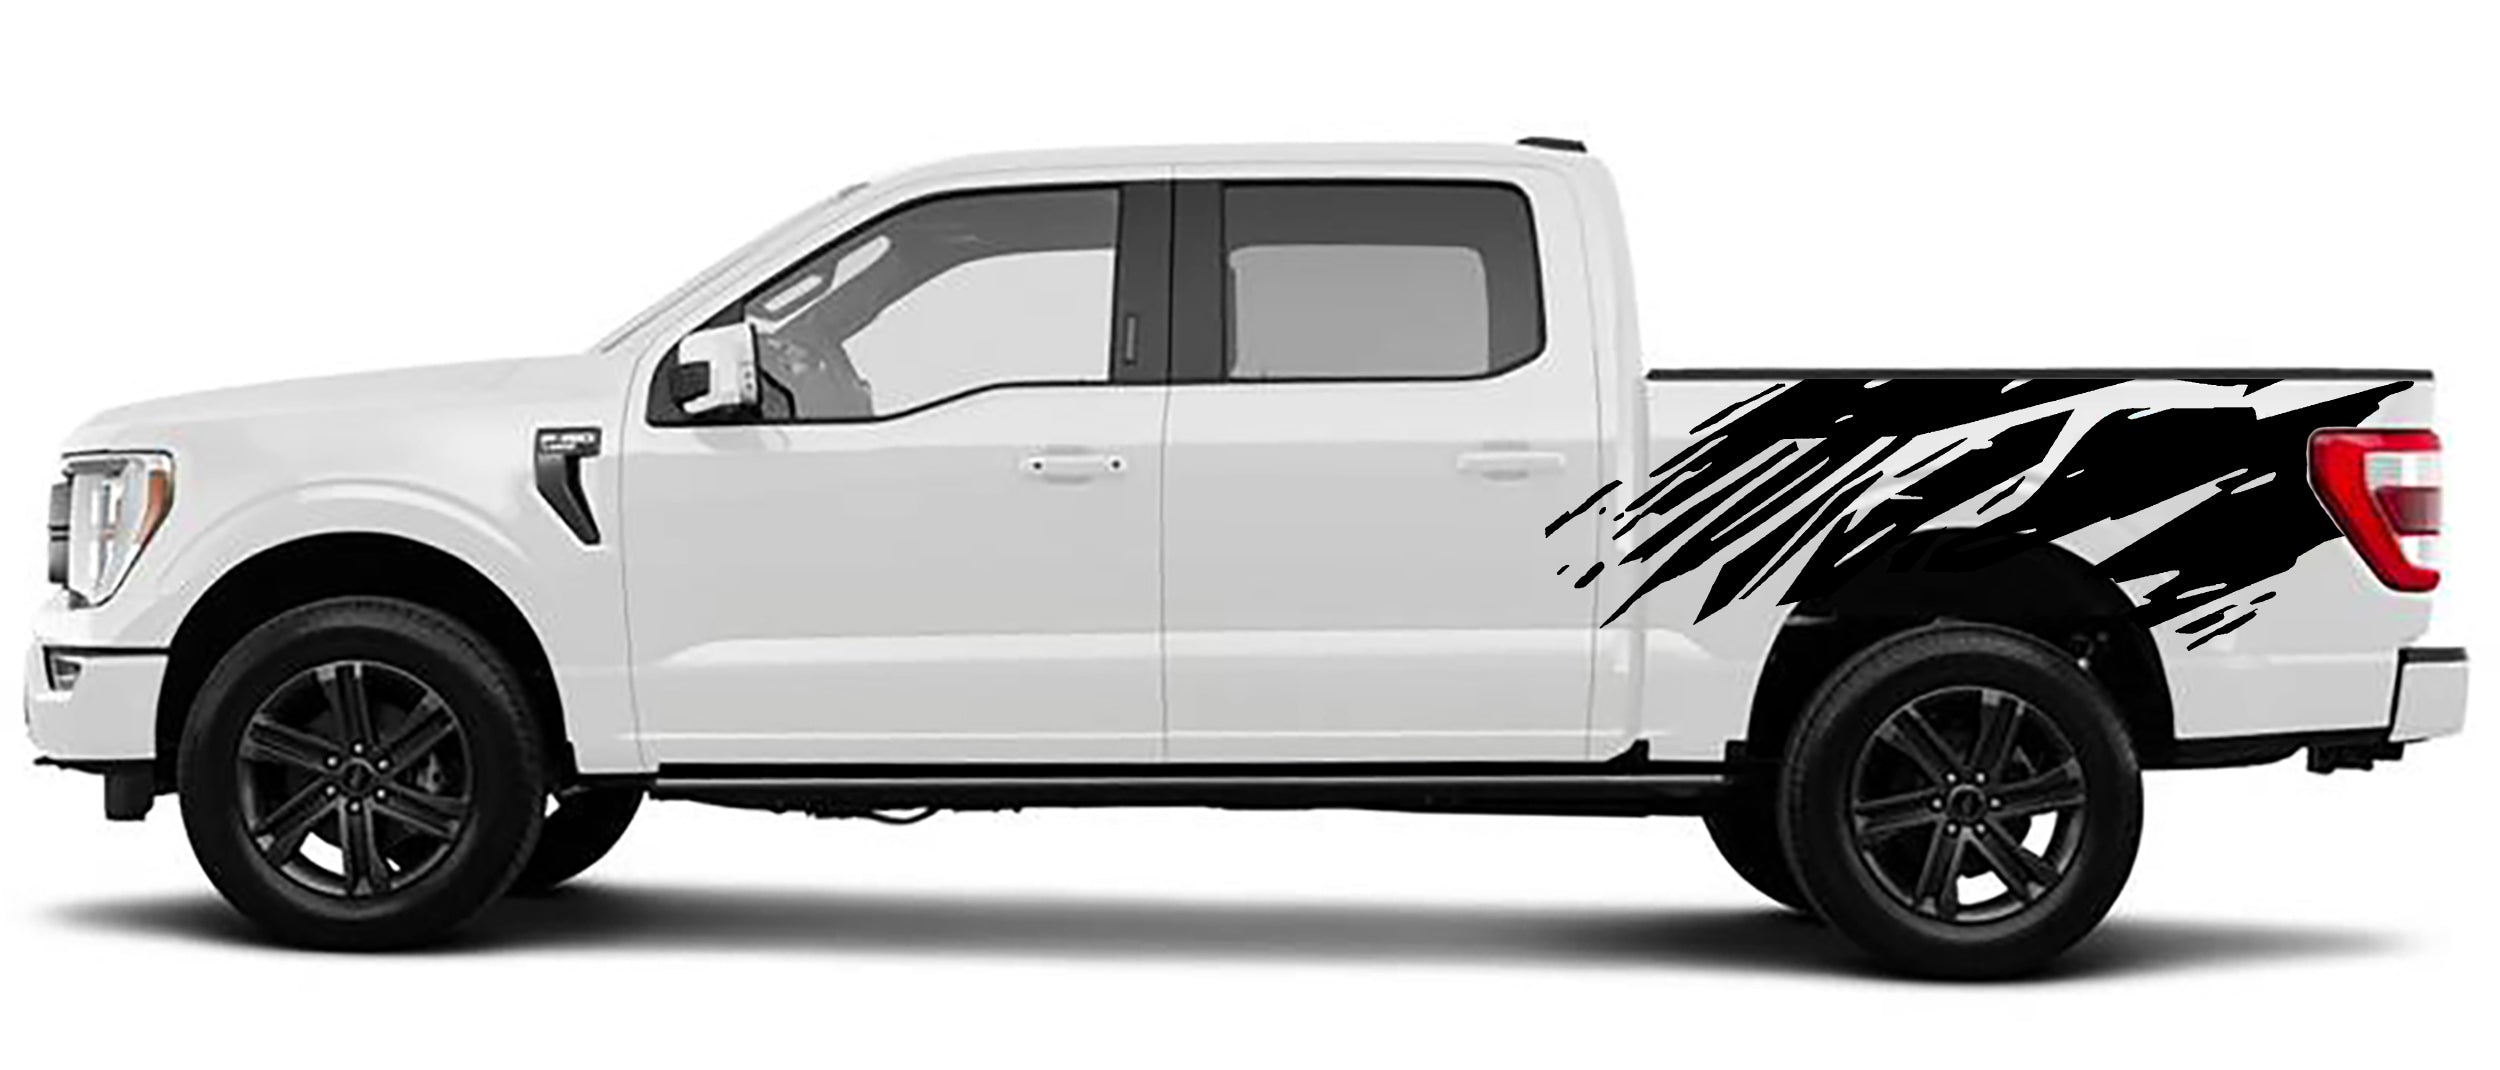 Ford F-150 Splatter Bed Decals (Pair) : Vinyl Graphics Kit Fits (2021-2023)